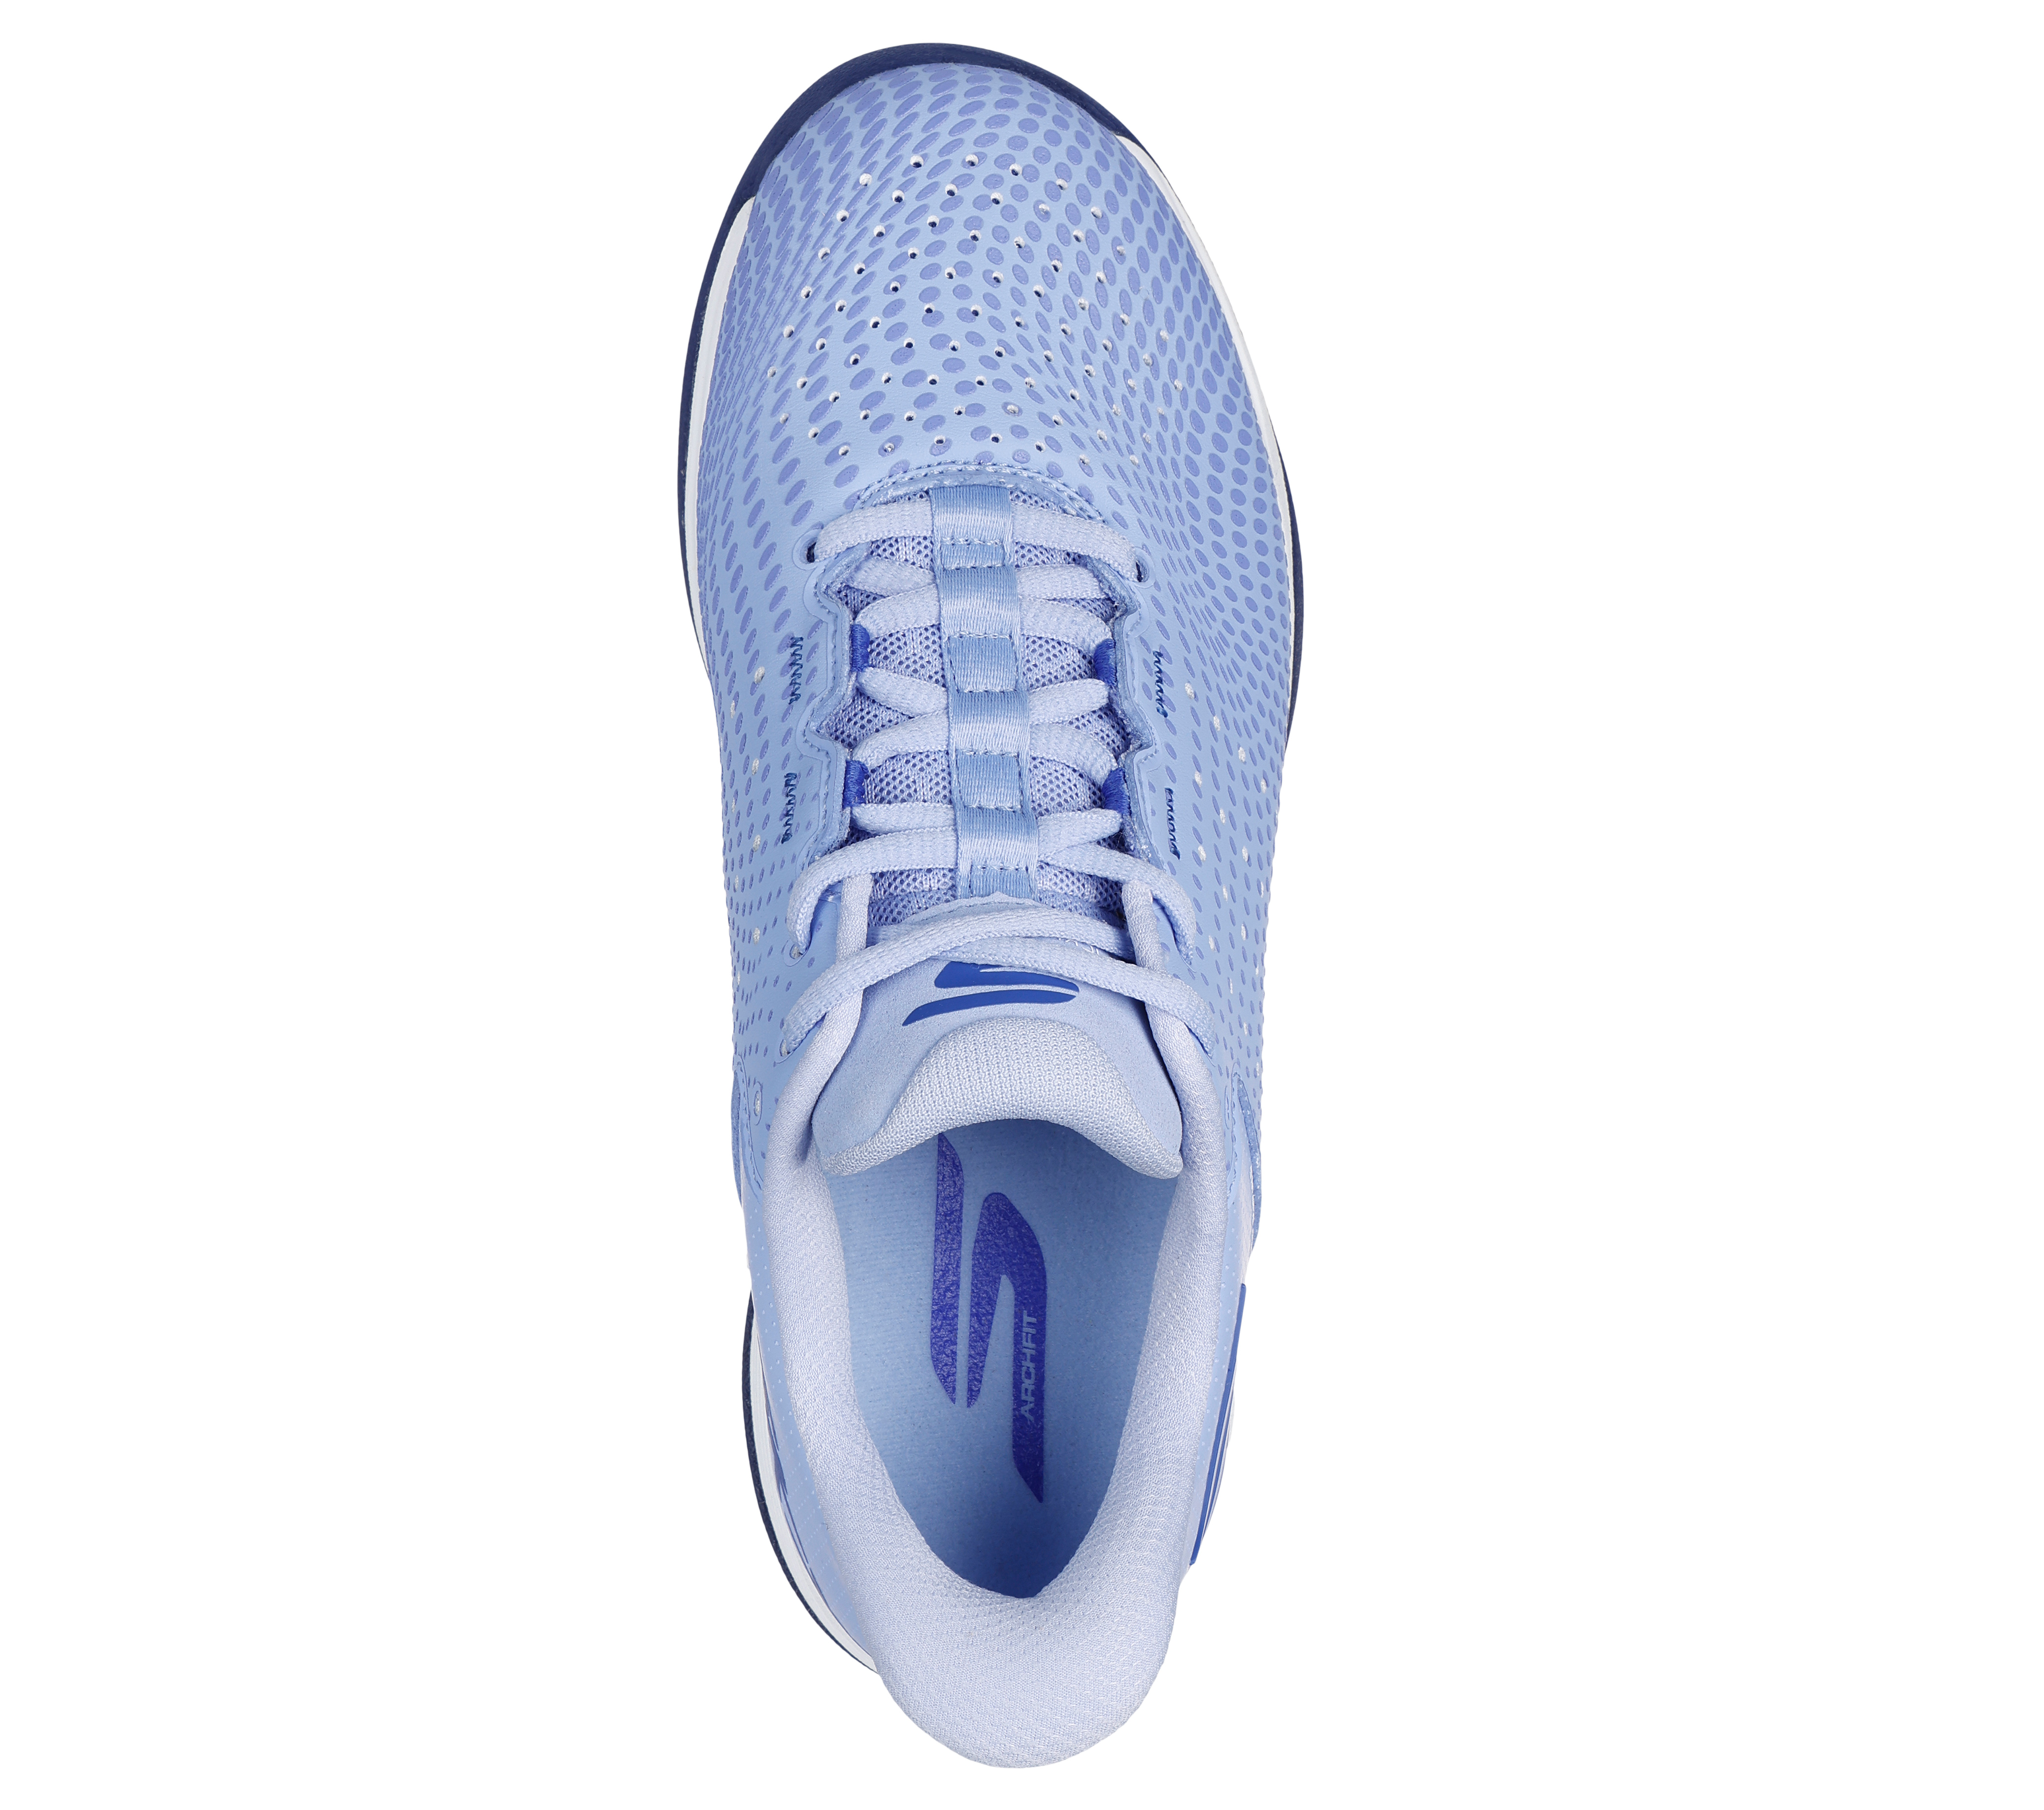 Shop the Skechers Slip-ins Relaxed Fit: Viper Court Reload 